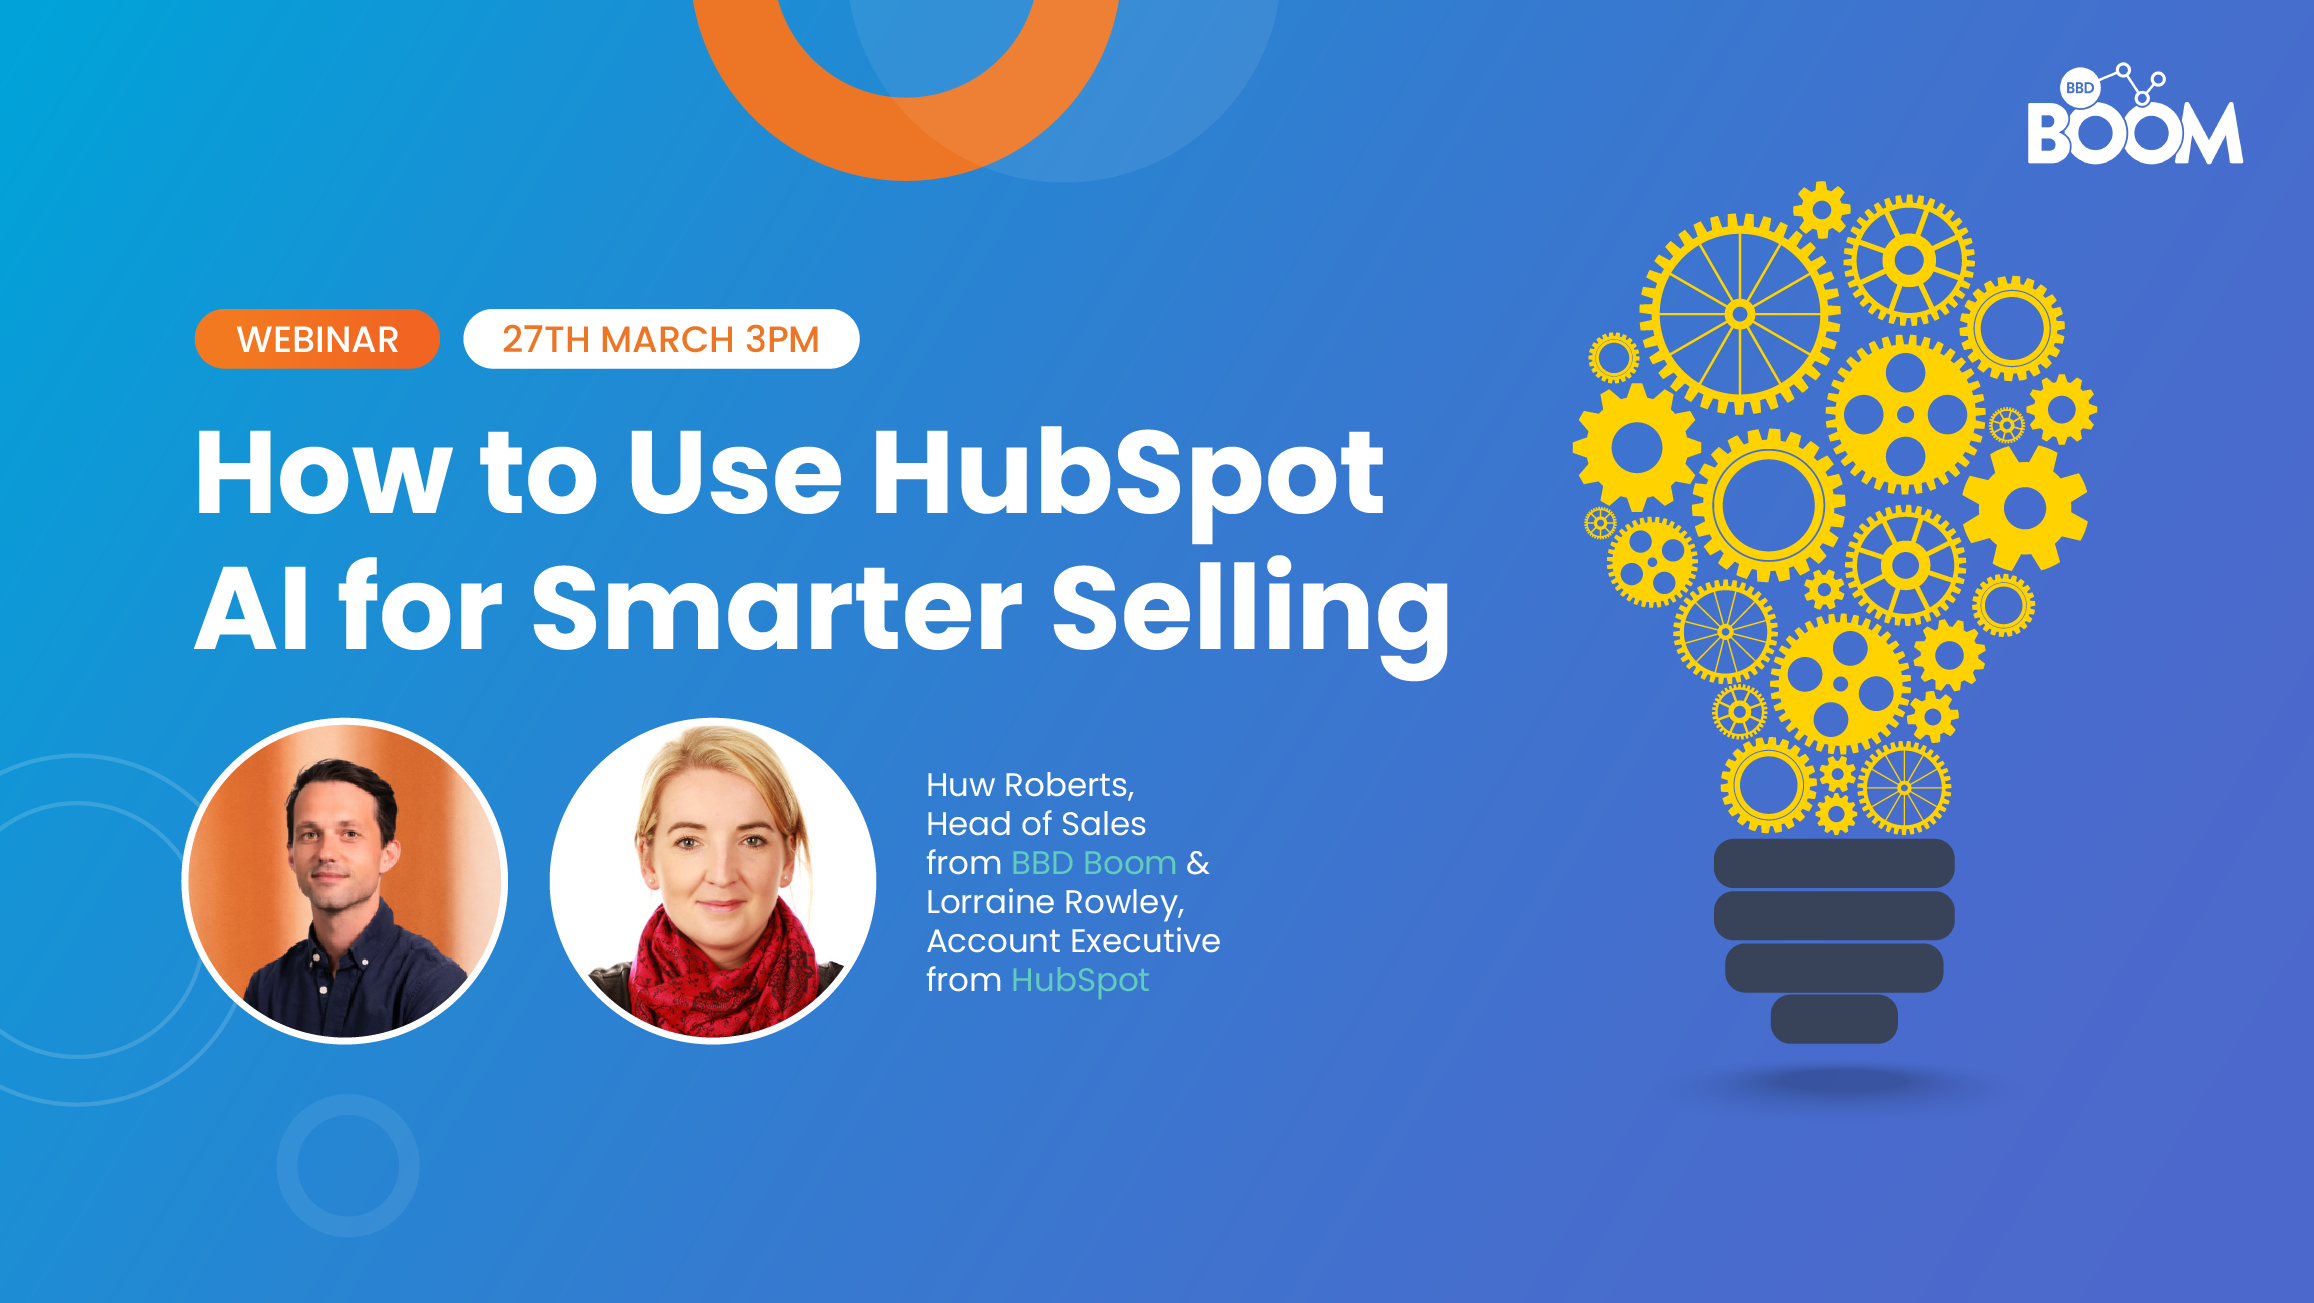 How to Use HubSpot AI for Smarter Selling